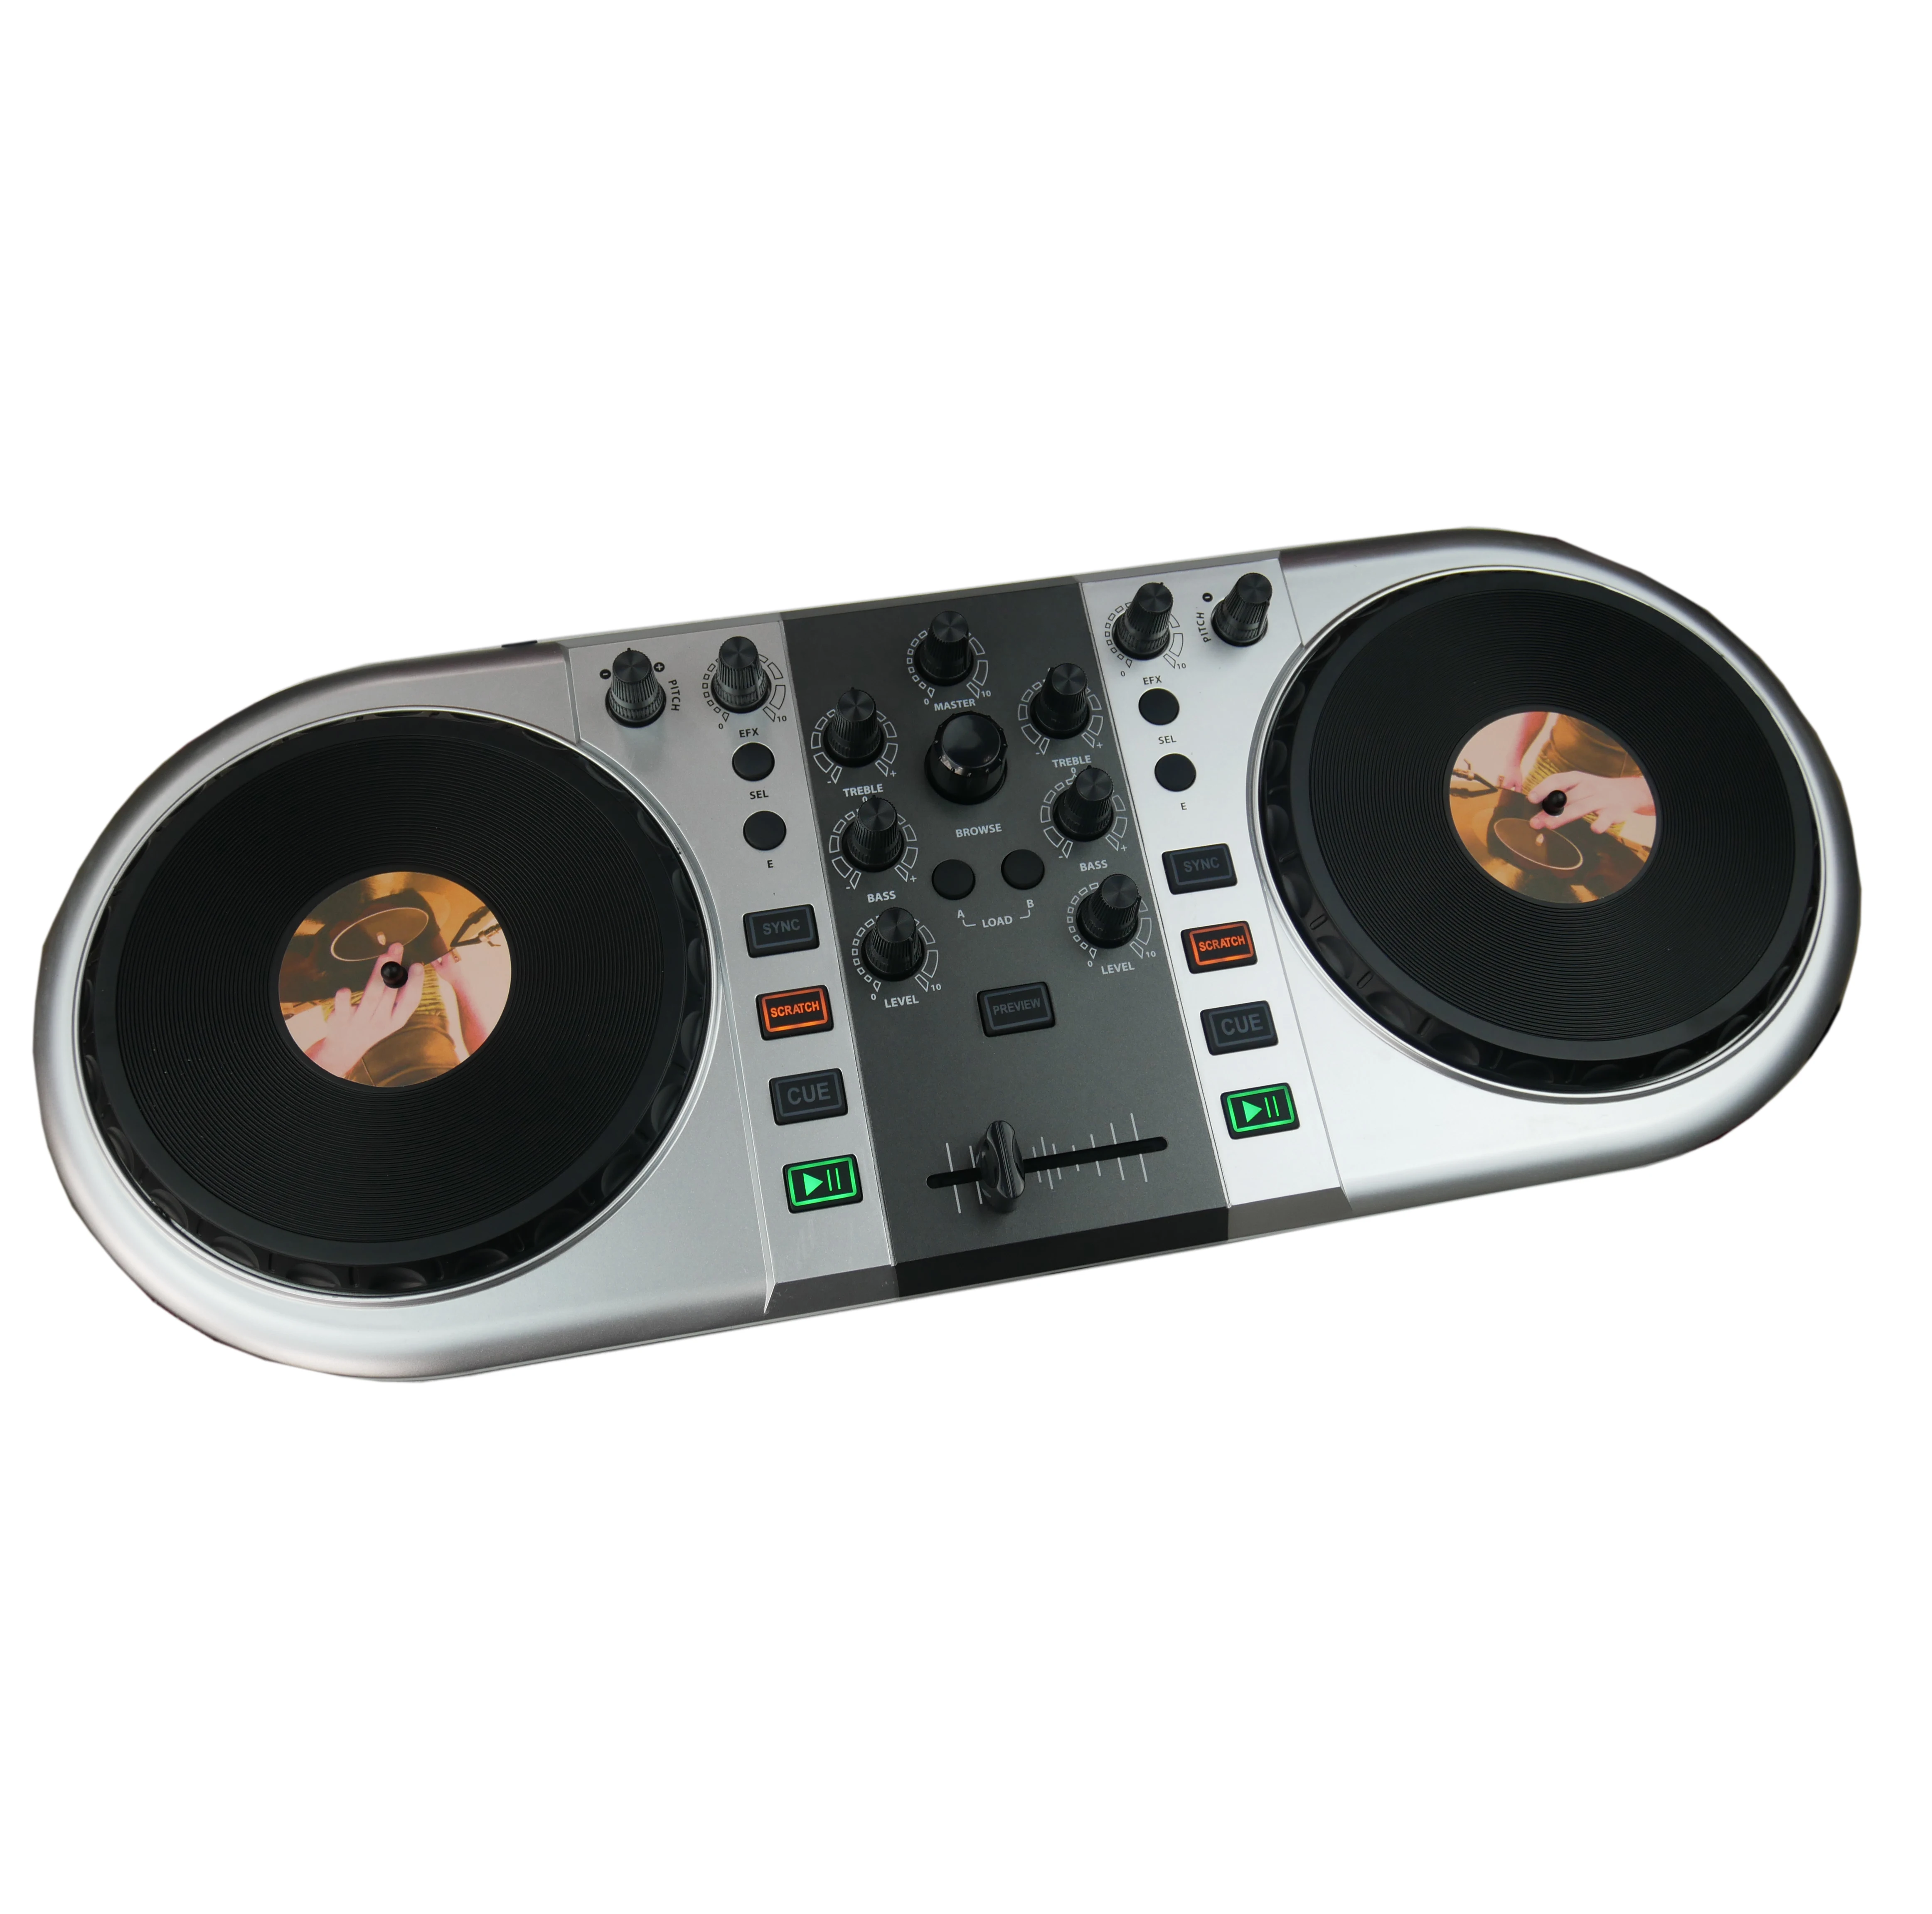 Lao Eventyrer Skat Source OEM professional best sale cheap price di midi controller for  traditional mixer CD player layout on m.alibaba.com